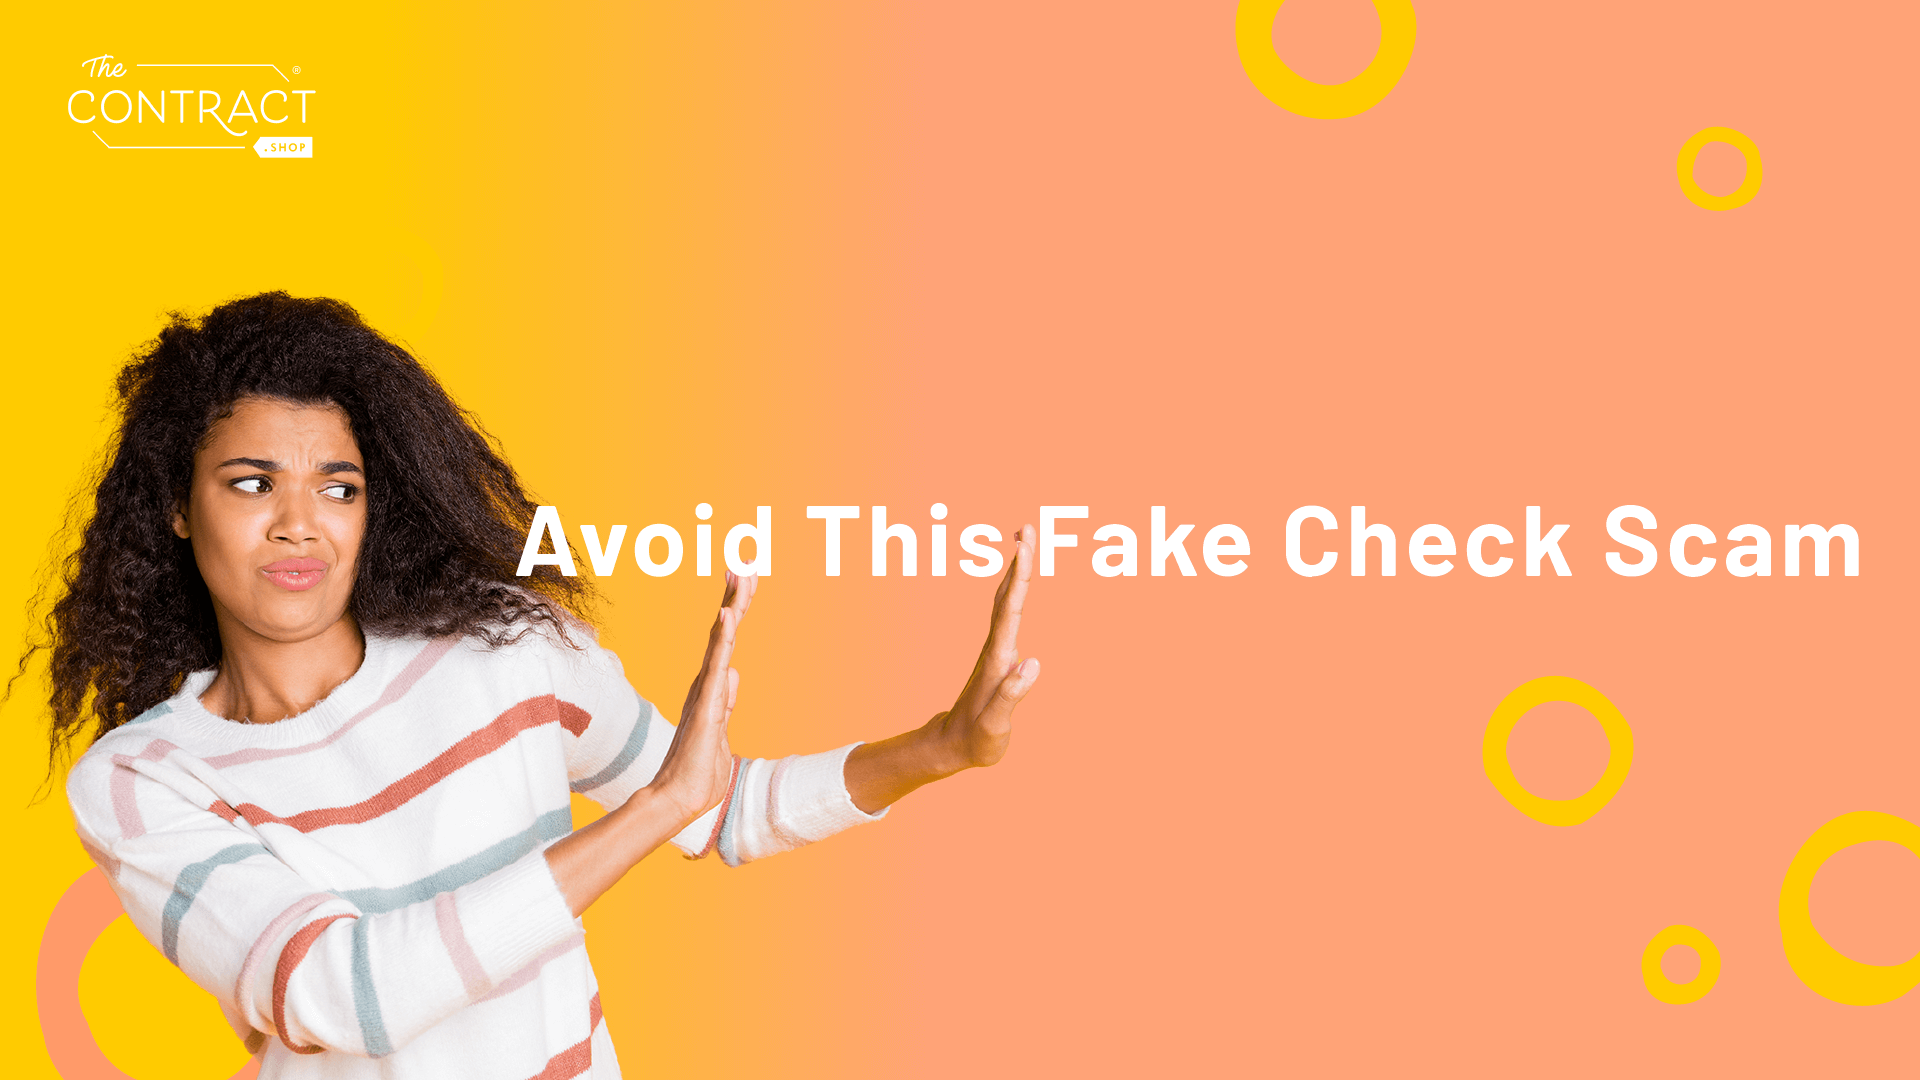 Avoid this fake check scam